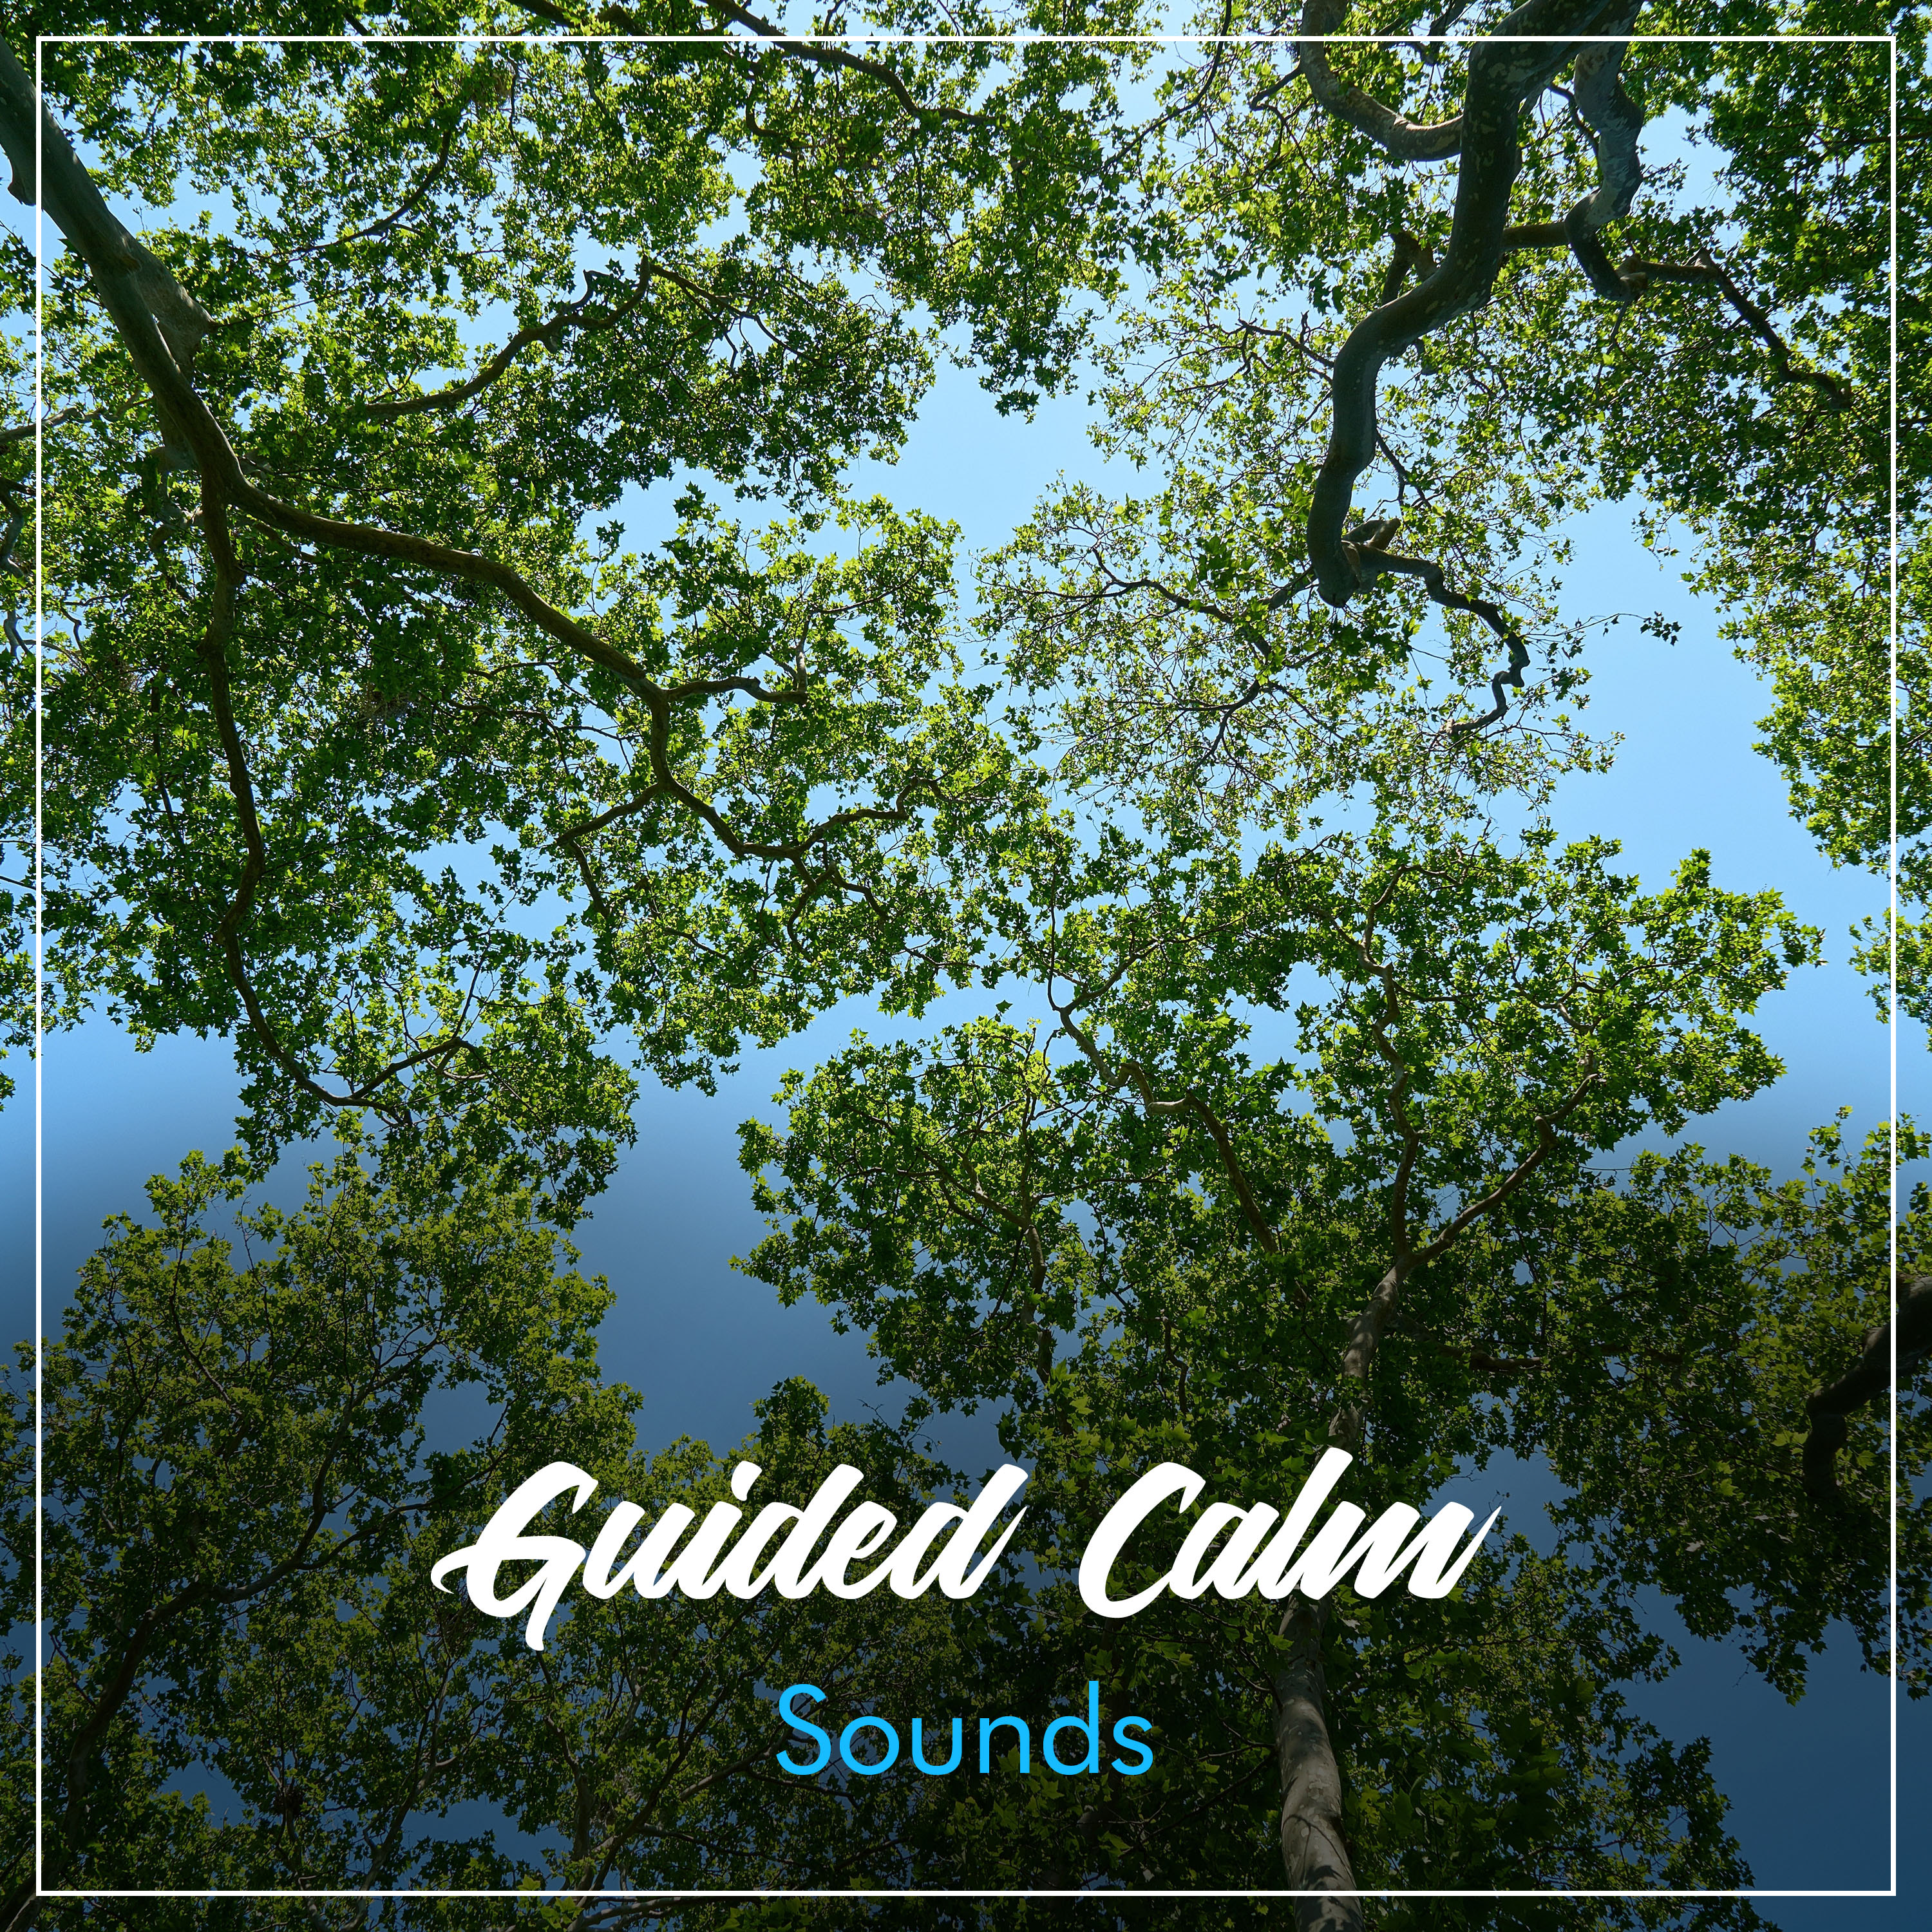 #5 Guided Calm Sounds for Relaxation & Mindfulness